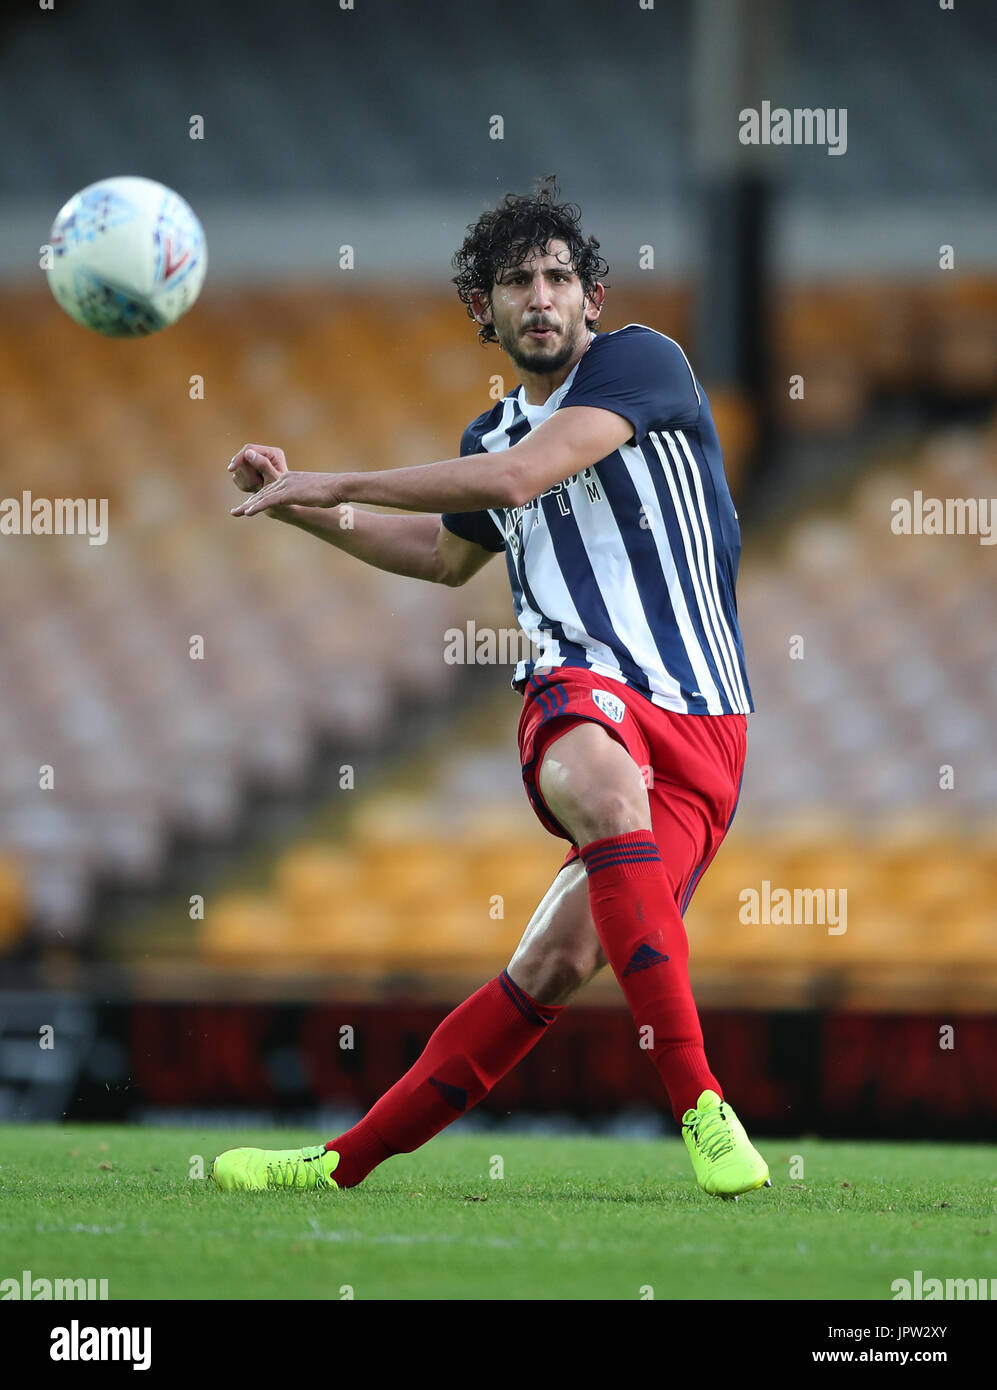 West Bromwich Albion's Ahmed Hegazy during the pre-season friendly match at Vale Park, Stoke. PRESS ASSOCIATION Photo. Picture date: Tuesday August 1, 2017. See PA story SOCCER Port Vale. Photo credit should read: Nick Potts/PA Wire. RESTRICTIONS: EDITORIAL USE ONLY No use with unauthorised audio, video, data, fixture lists, club/league logos or 'live' services. Online in-match use limited to 75 images, no video emulation. No use in betting, games or single club/league/player publications. Stock Photo